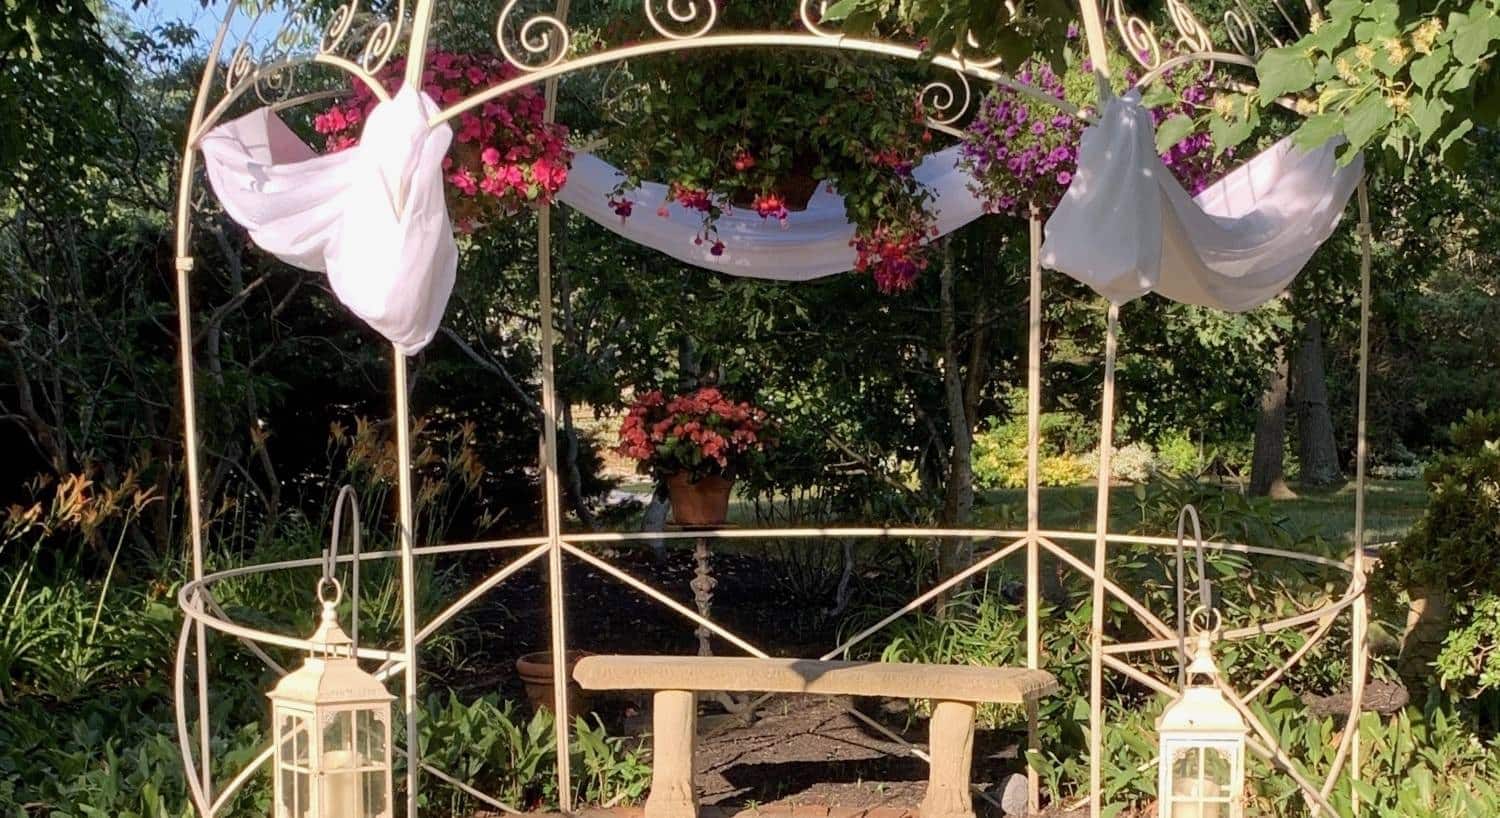 Cream rod iron gazebo decorated with hanging pink and purple flowers and draped white fabric all surrounded by green trees and shrubs with a concrete bench in the middle